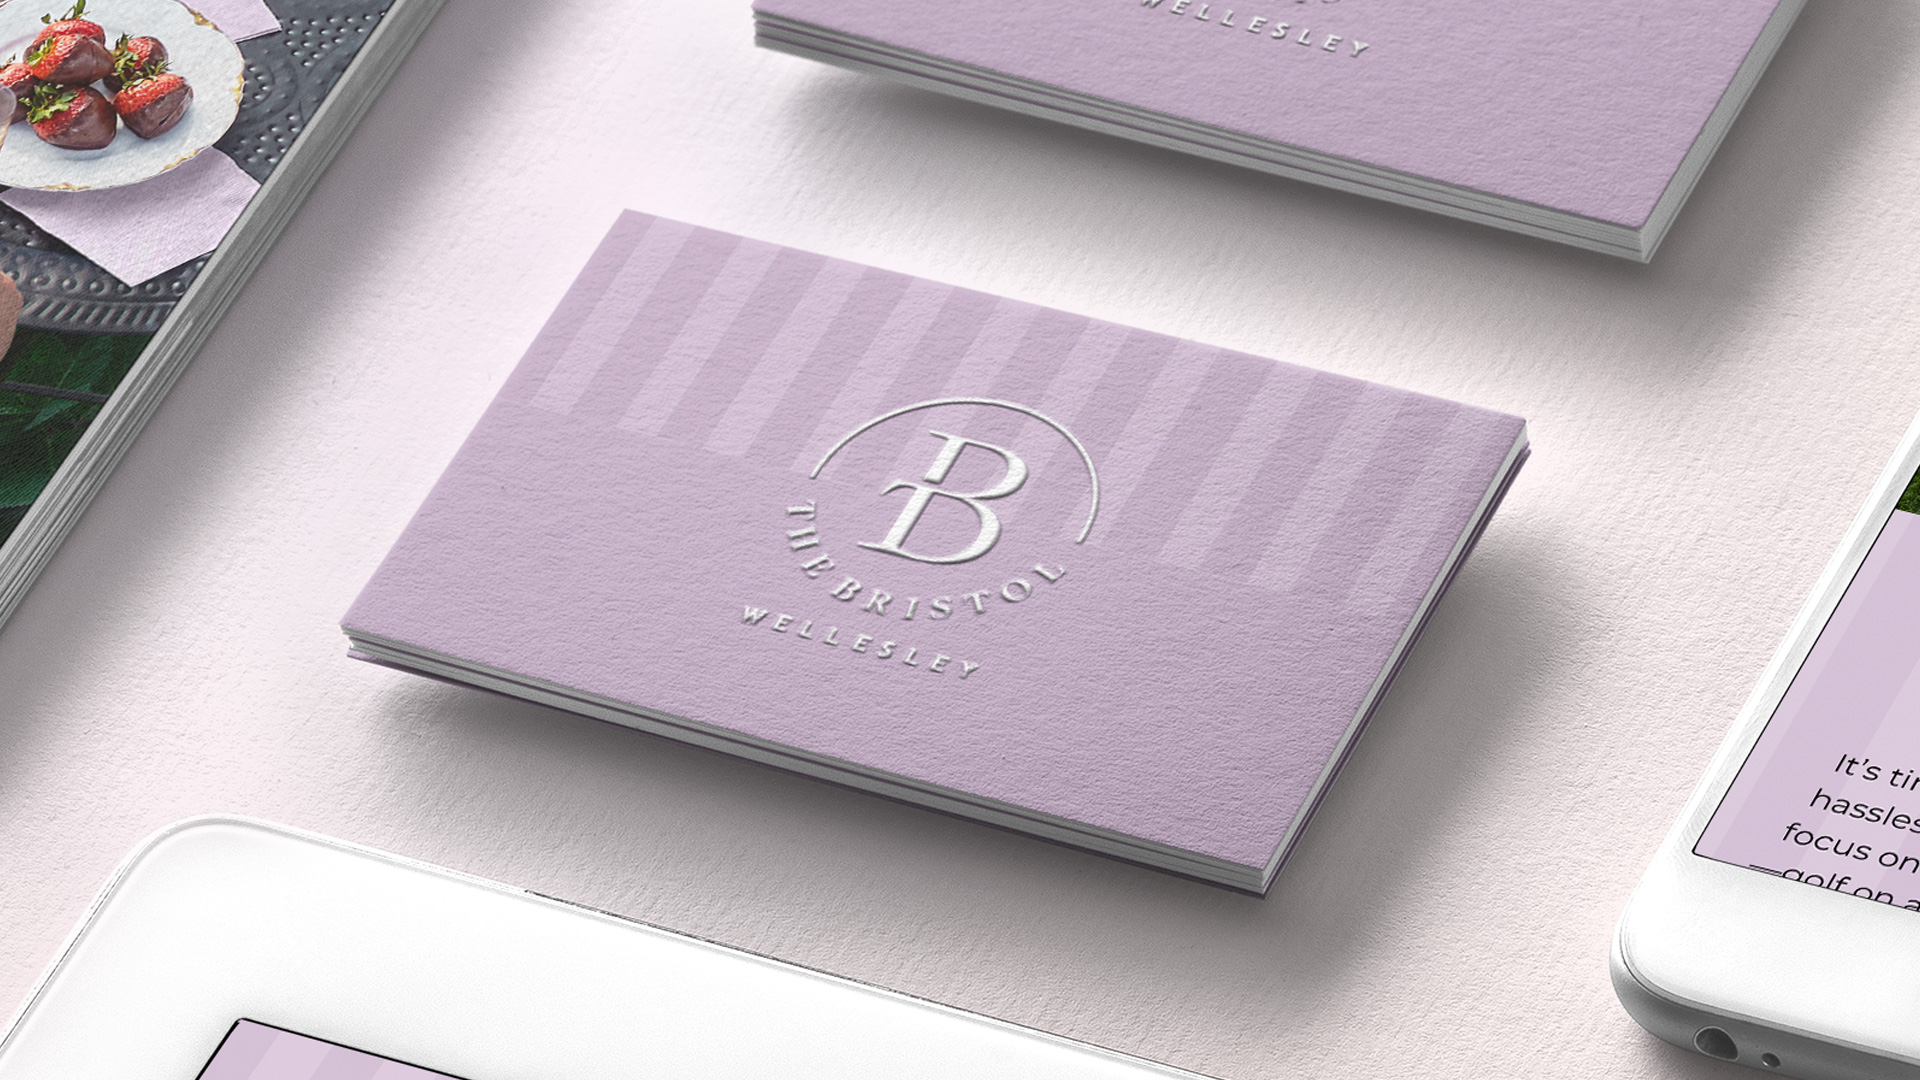 the bristol wellesley logo and business cards by best logo design agency